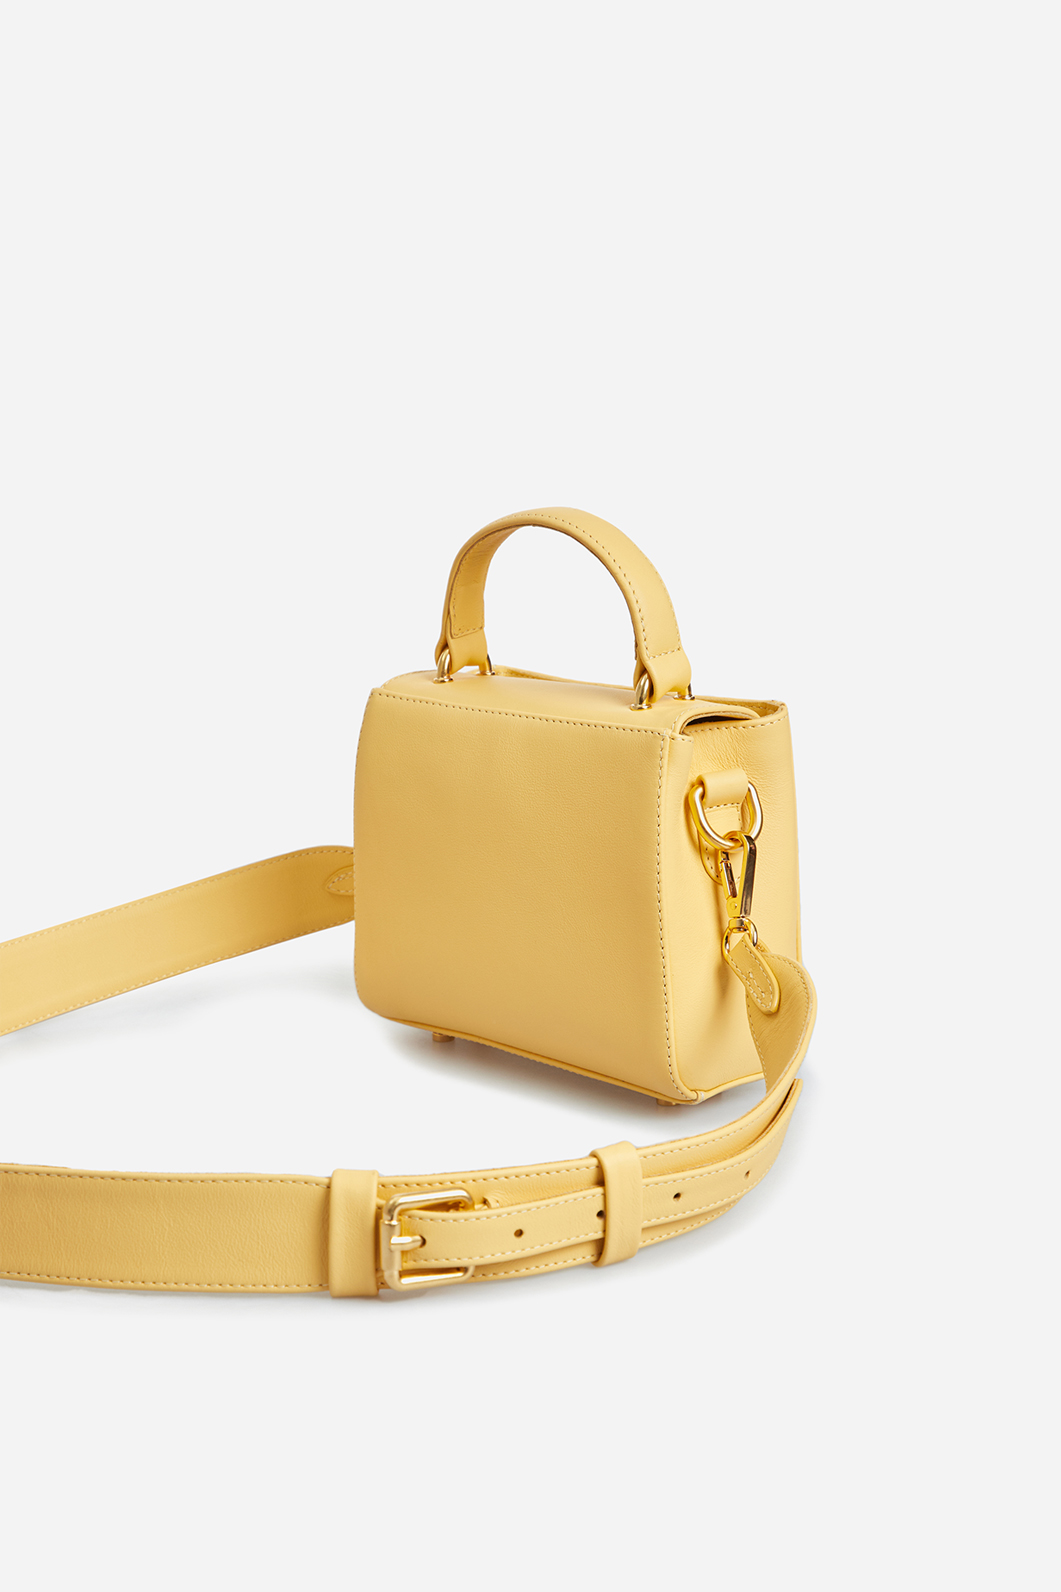 Erna micro RS yellow leather
city bag /gold/